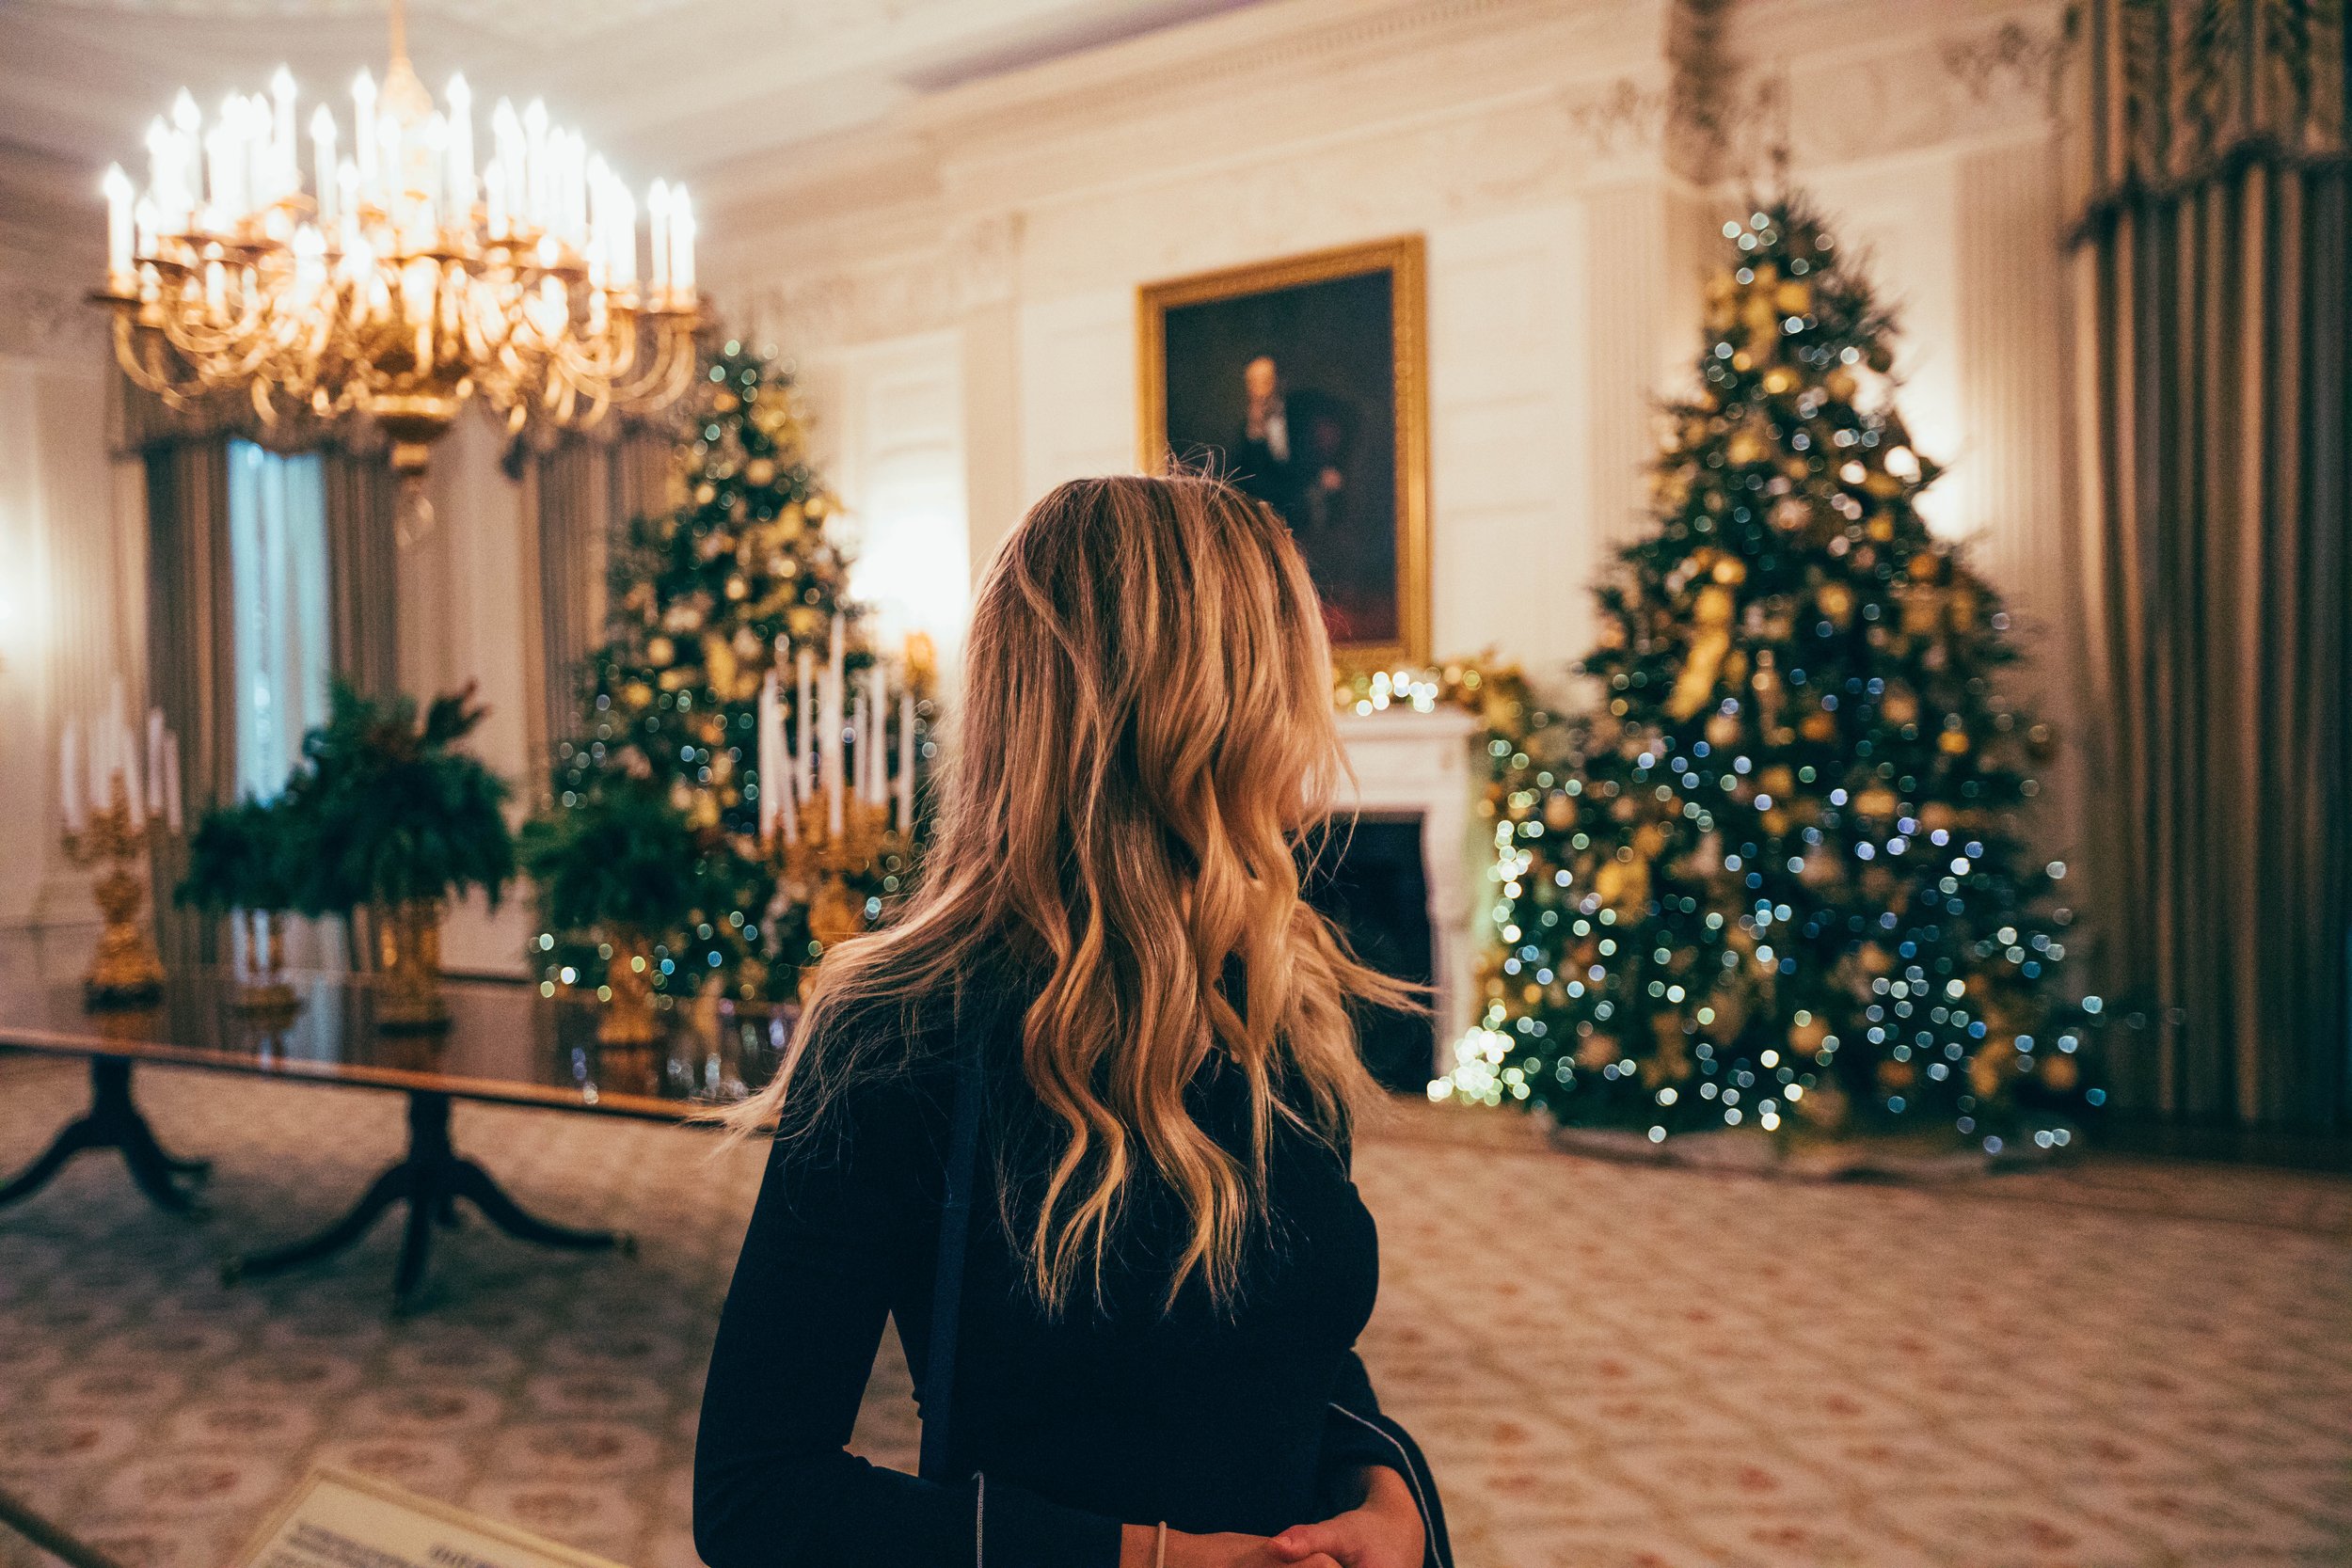 Woman looking back at Christmas trees in festive hotel lobby